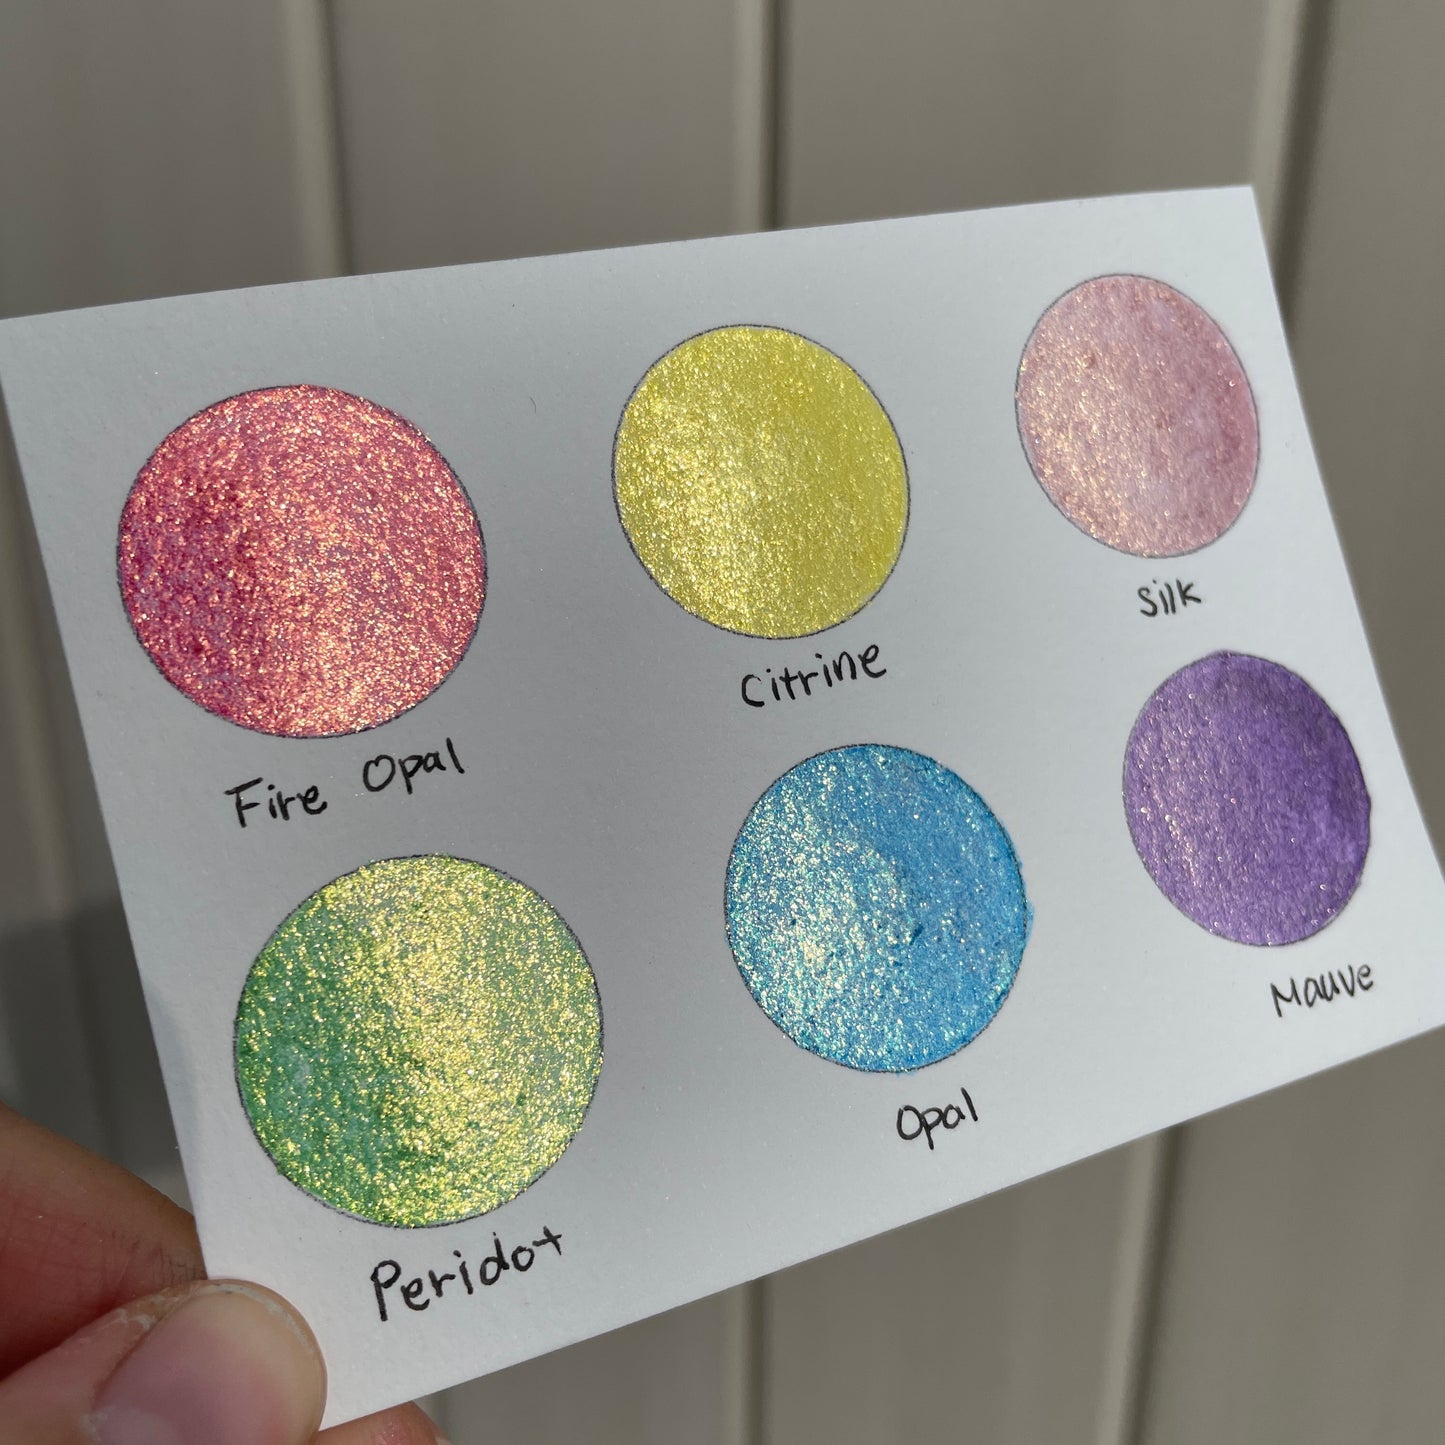 Bling Bling 1 Half Pan Handmade Color Shift Aurora Shimmer Metallic Chameleon Watercolor Paints by iuilewatercolors